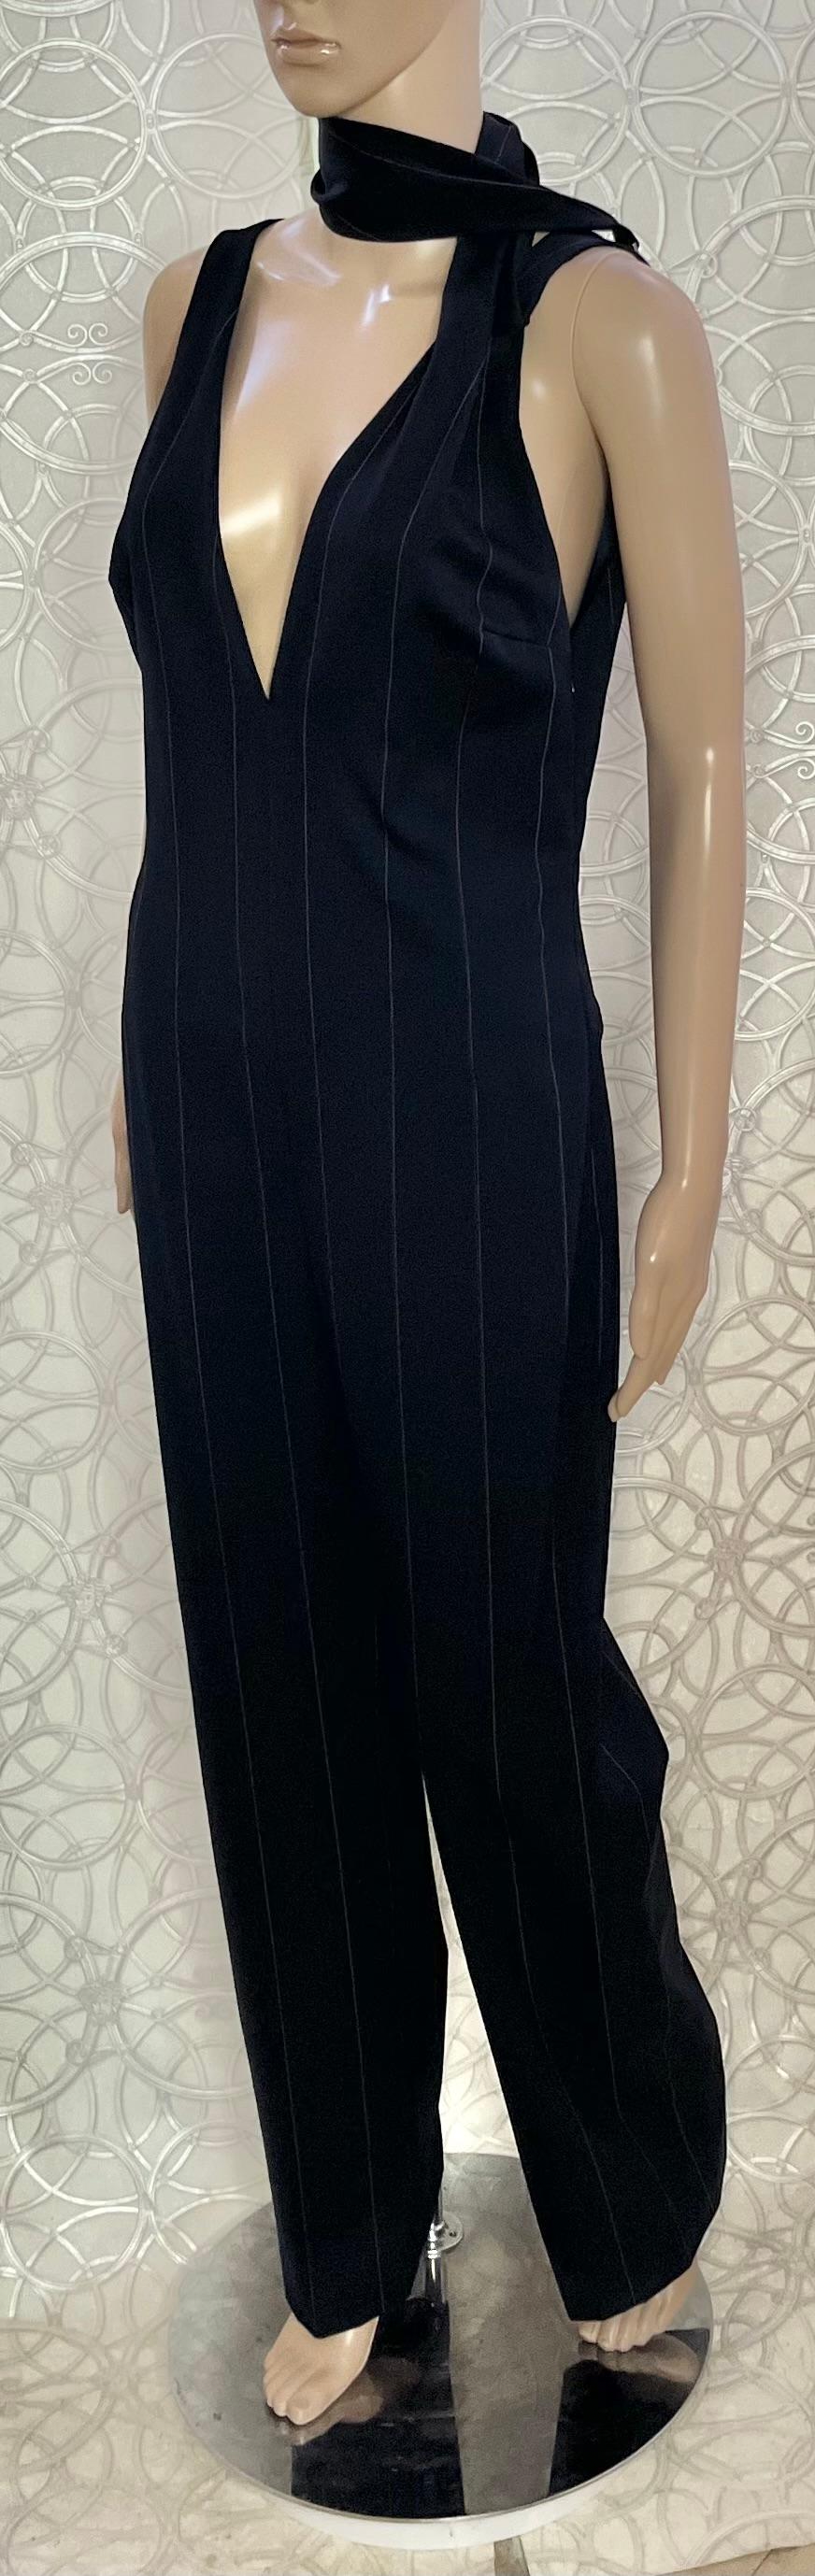 Gianni Versace

Navy blue new pinstripe jumpsuit 

Deep V-neck
Open V-back

Concealed zip fastening 


Content:
95% wool, 
4% Silk
1% polyester


Size IT 42 - US 6 
armpit to armpit 16